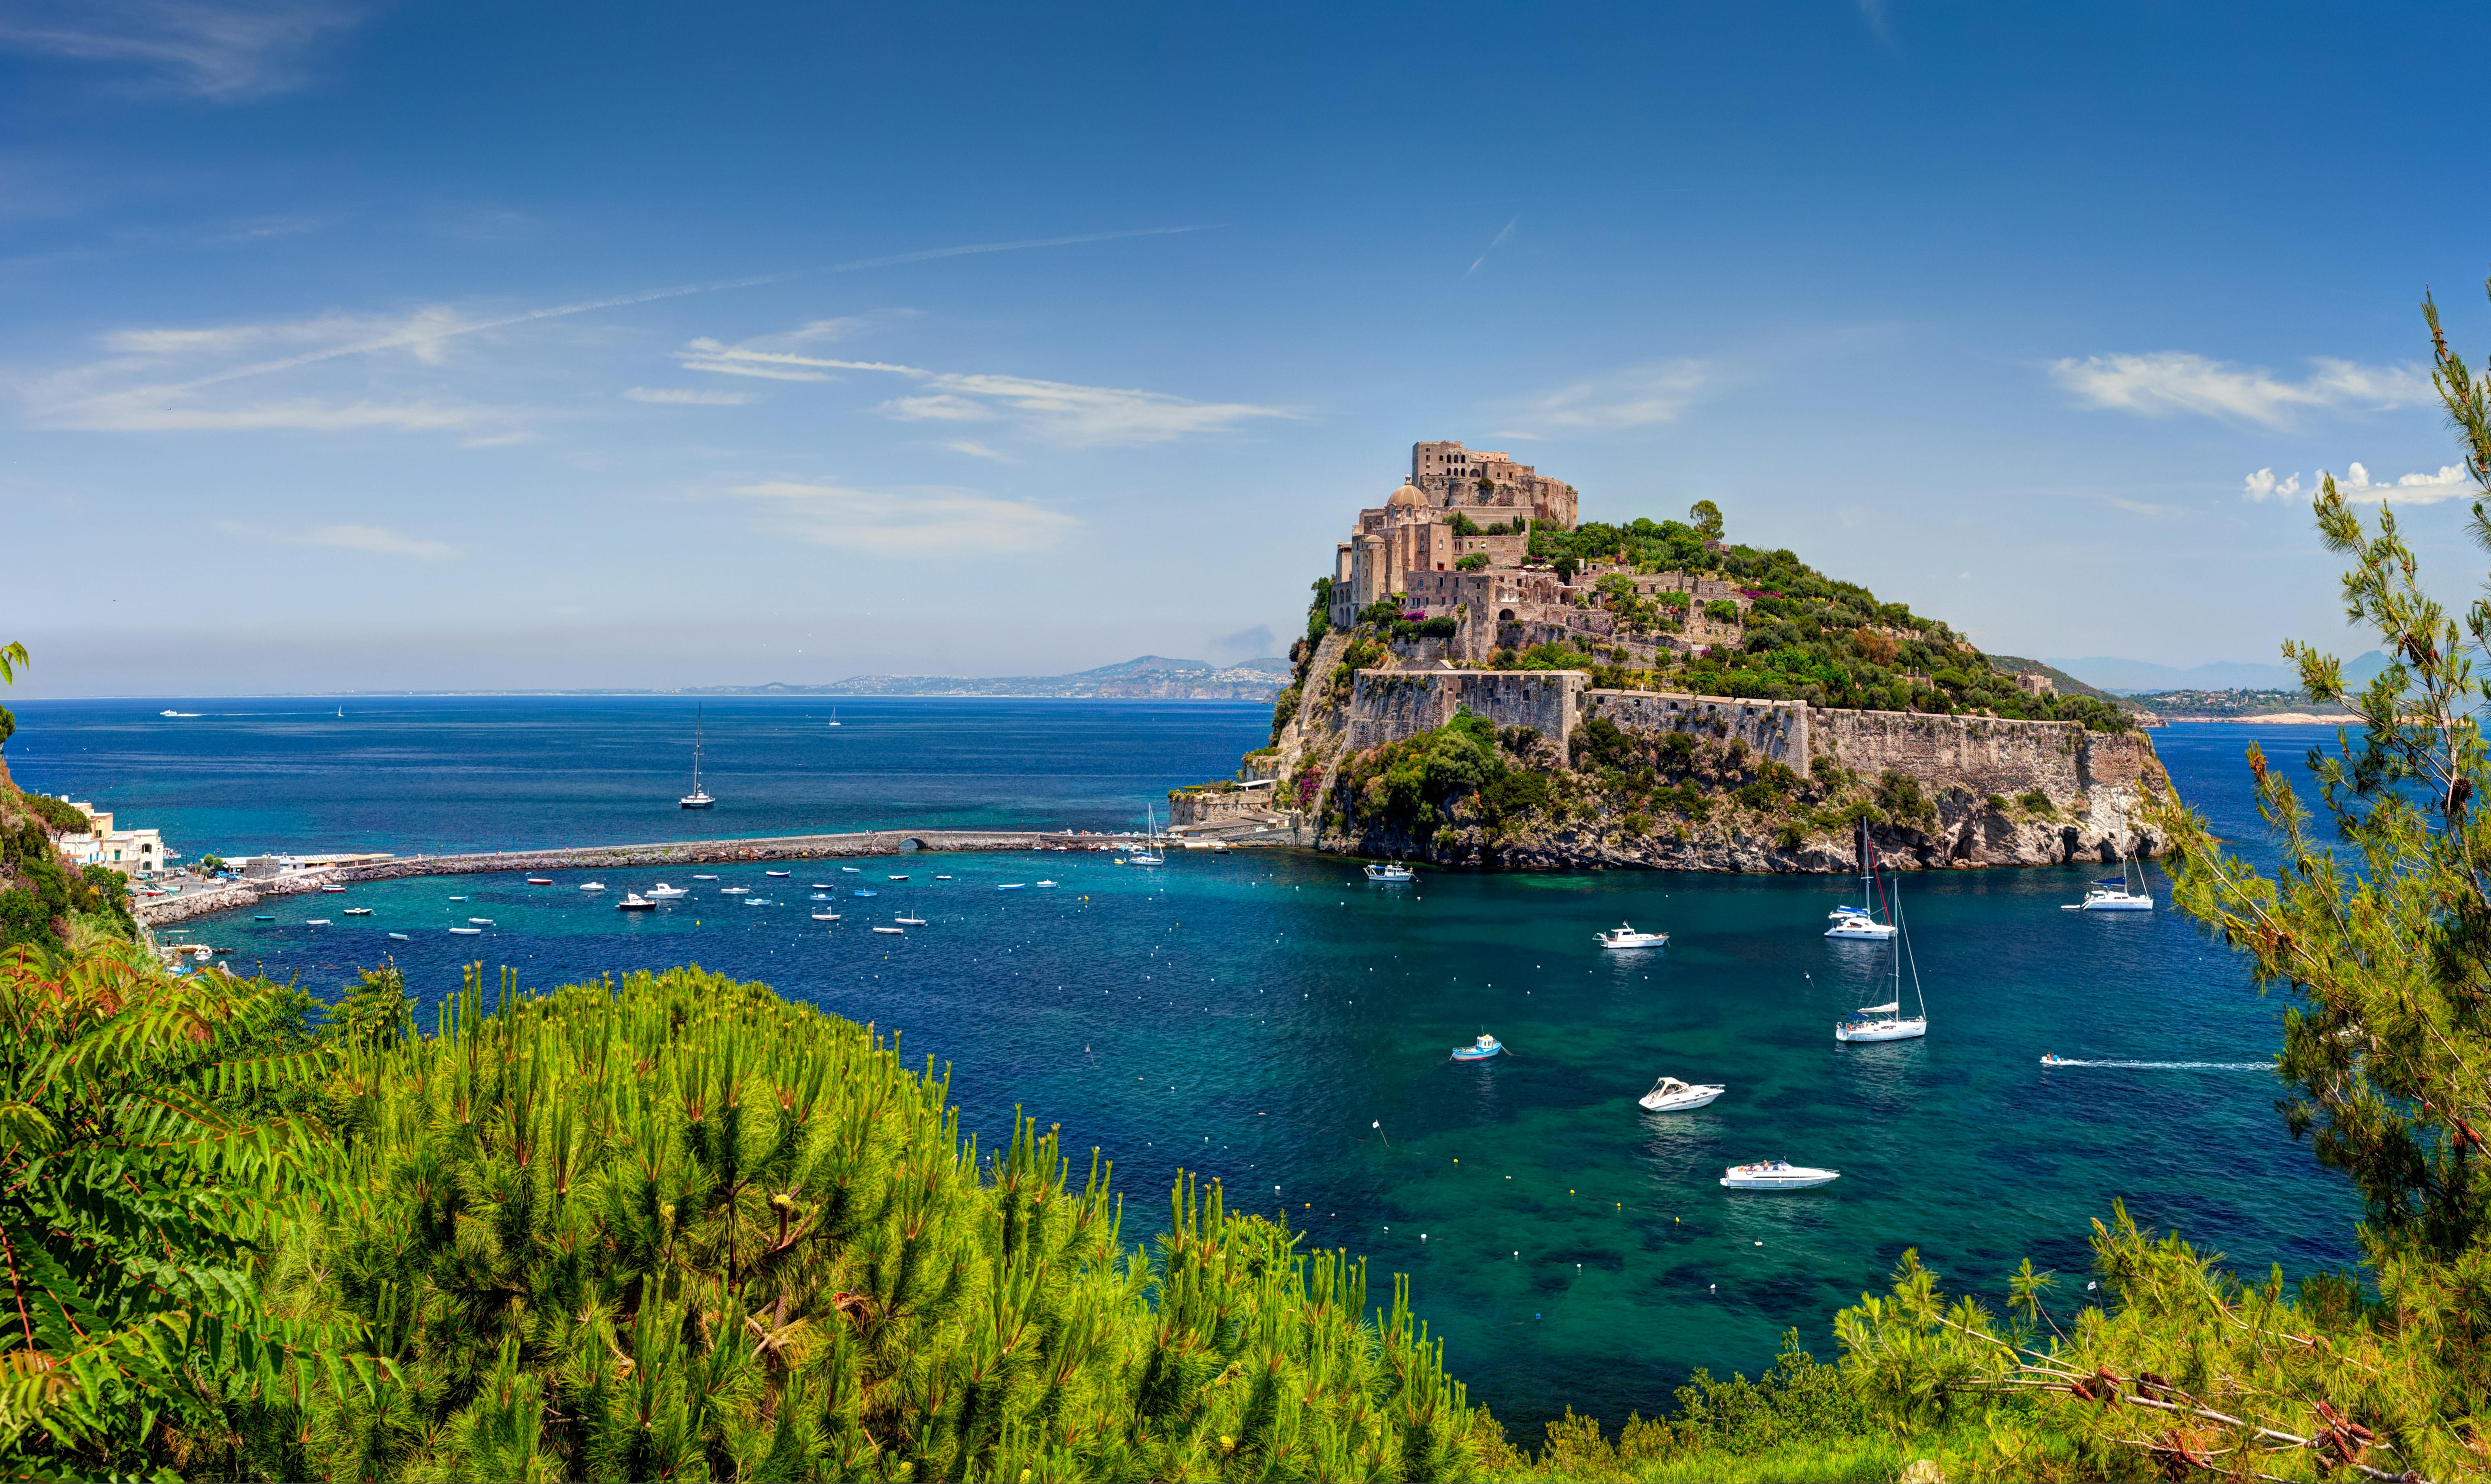 Day trip to Ischia Island with lunch